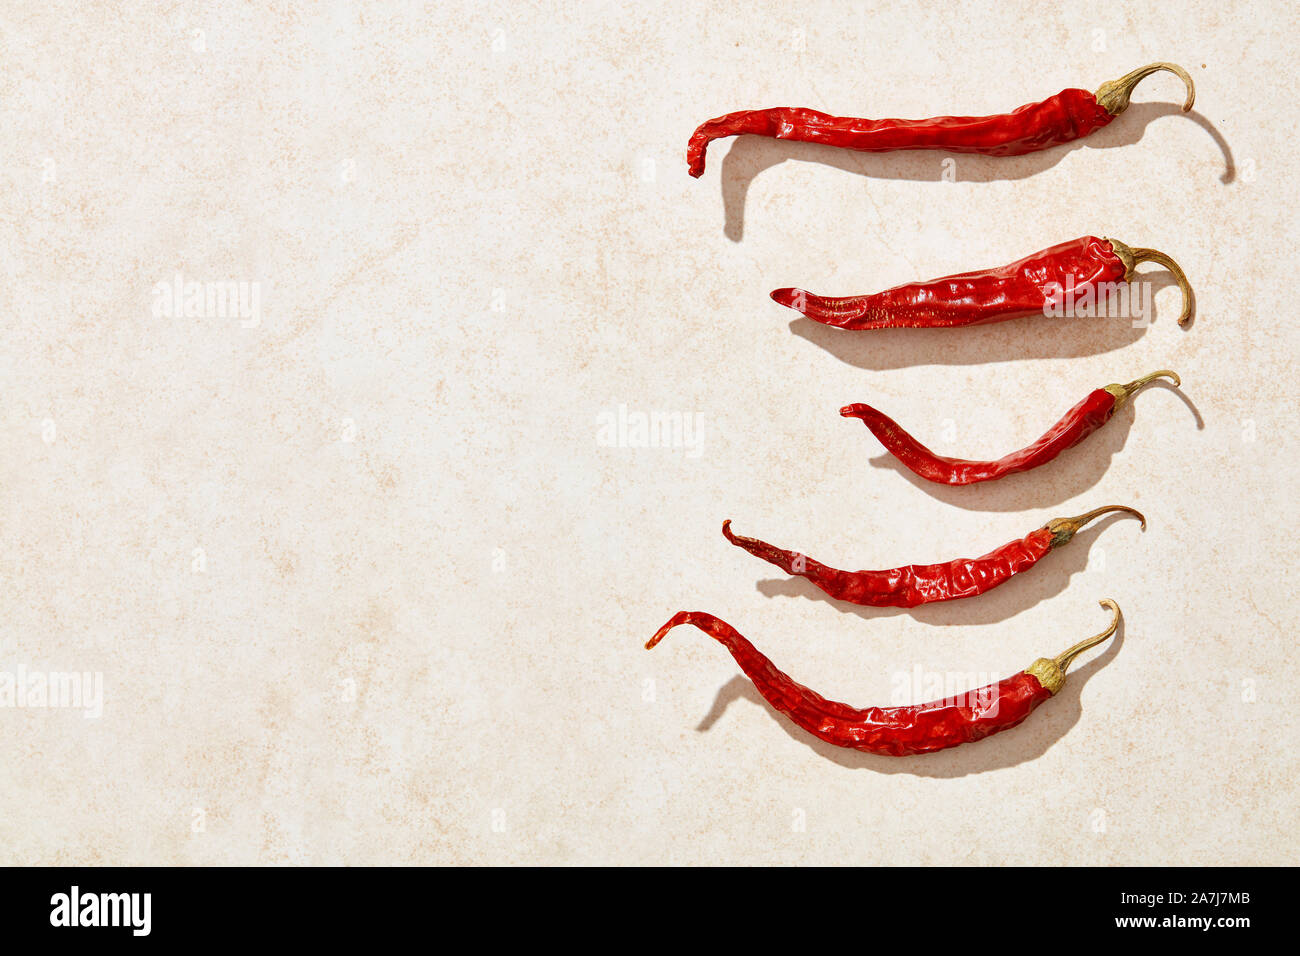 Sun dried red hot chili peppers under harsh sunlight on stone background. Overhead view Stock Photo